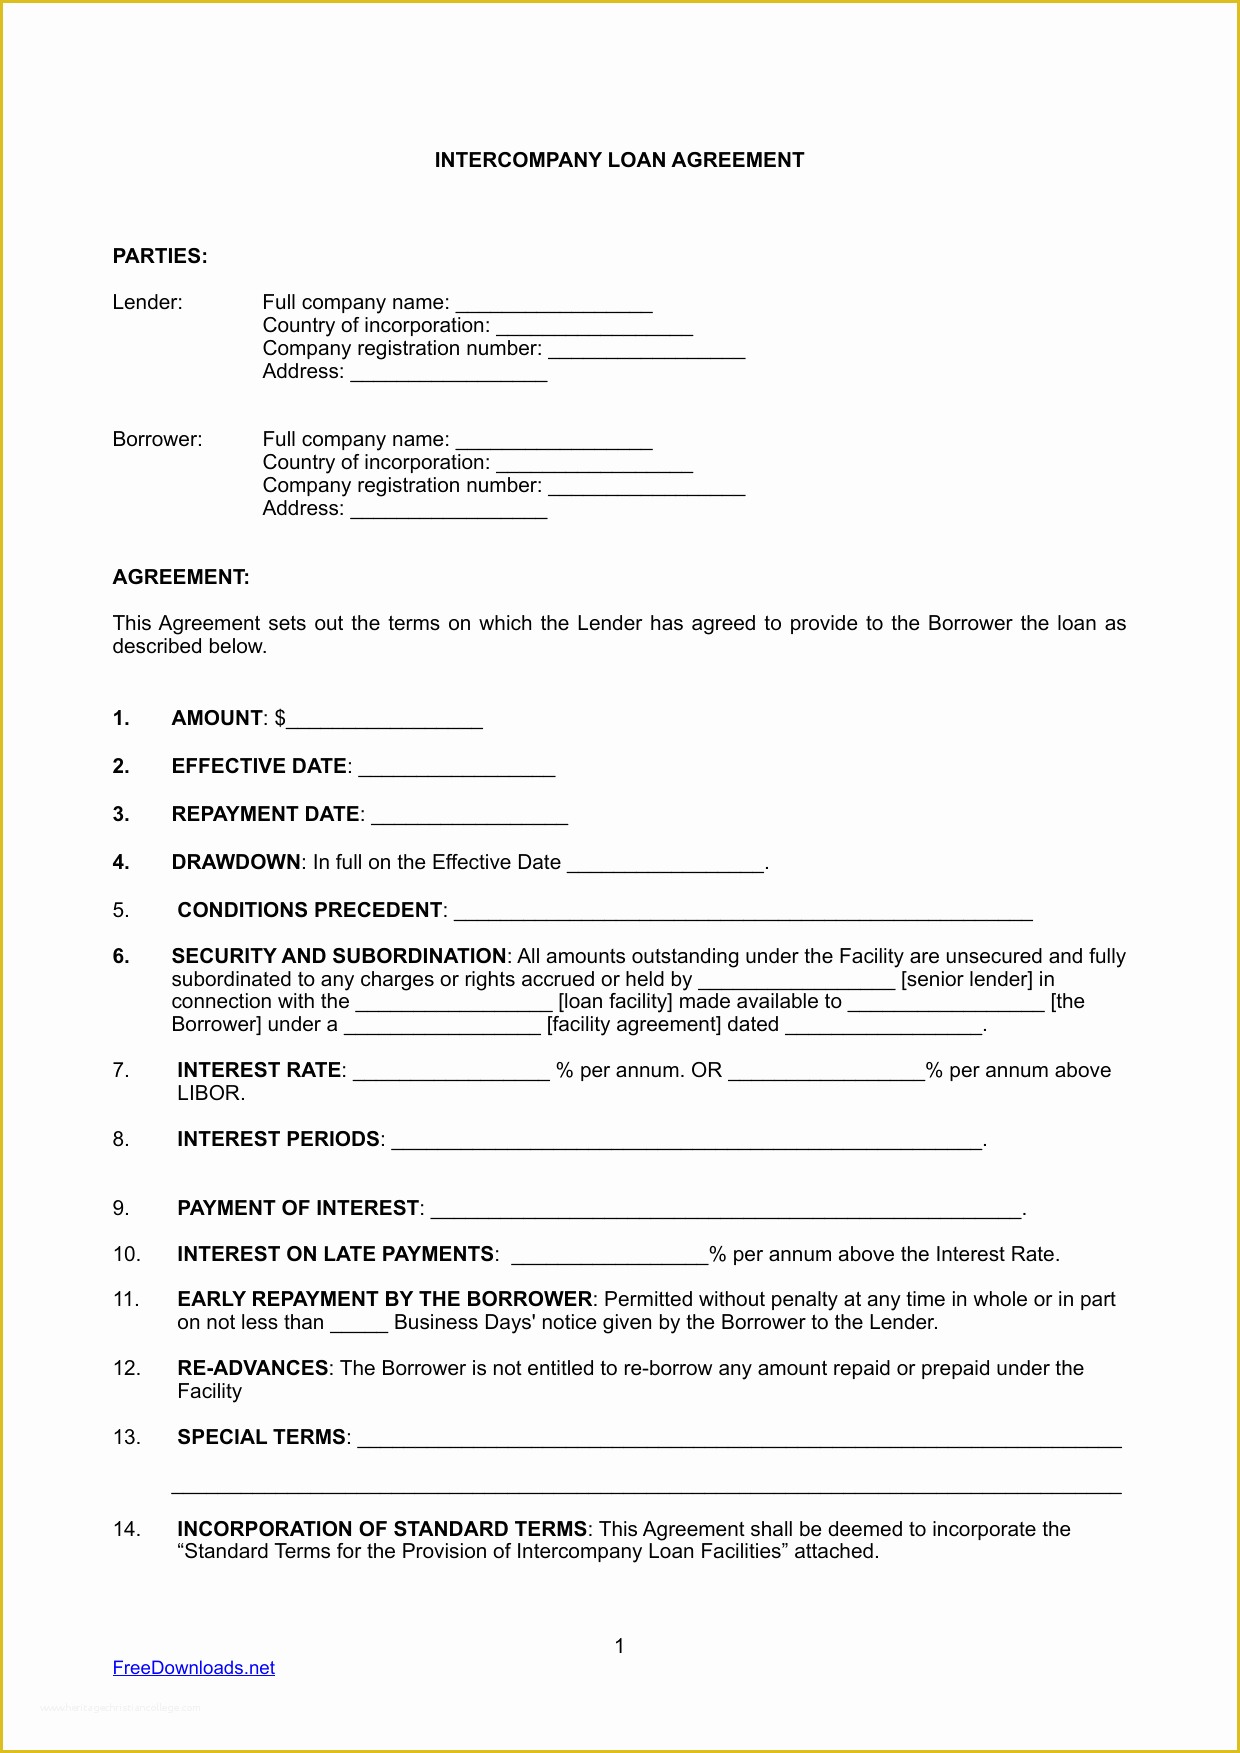 Free Loan Agreement Template Of Download Inter Pany Loan Agreement Template Pdf